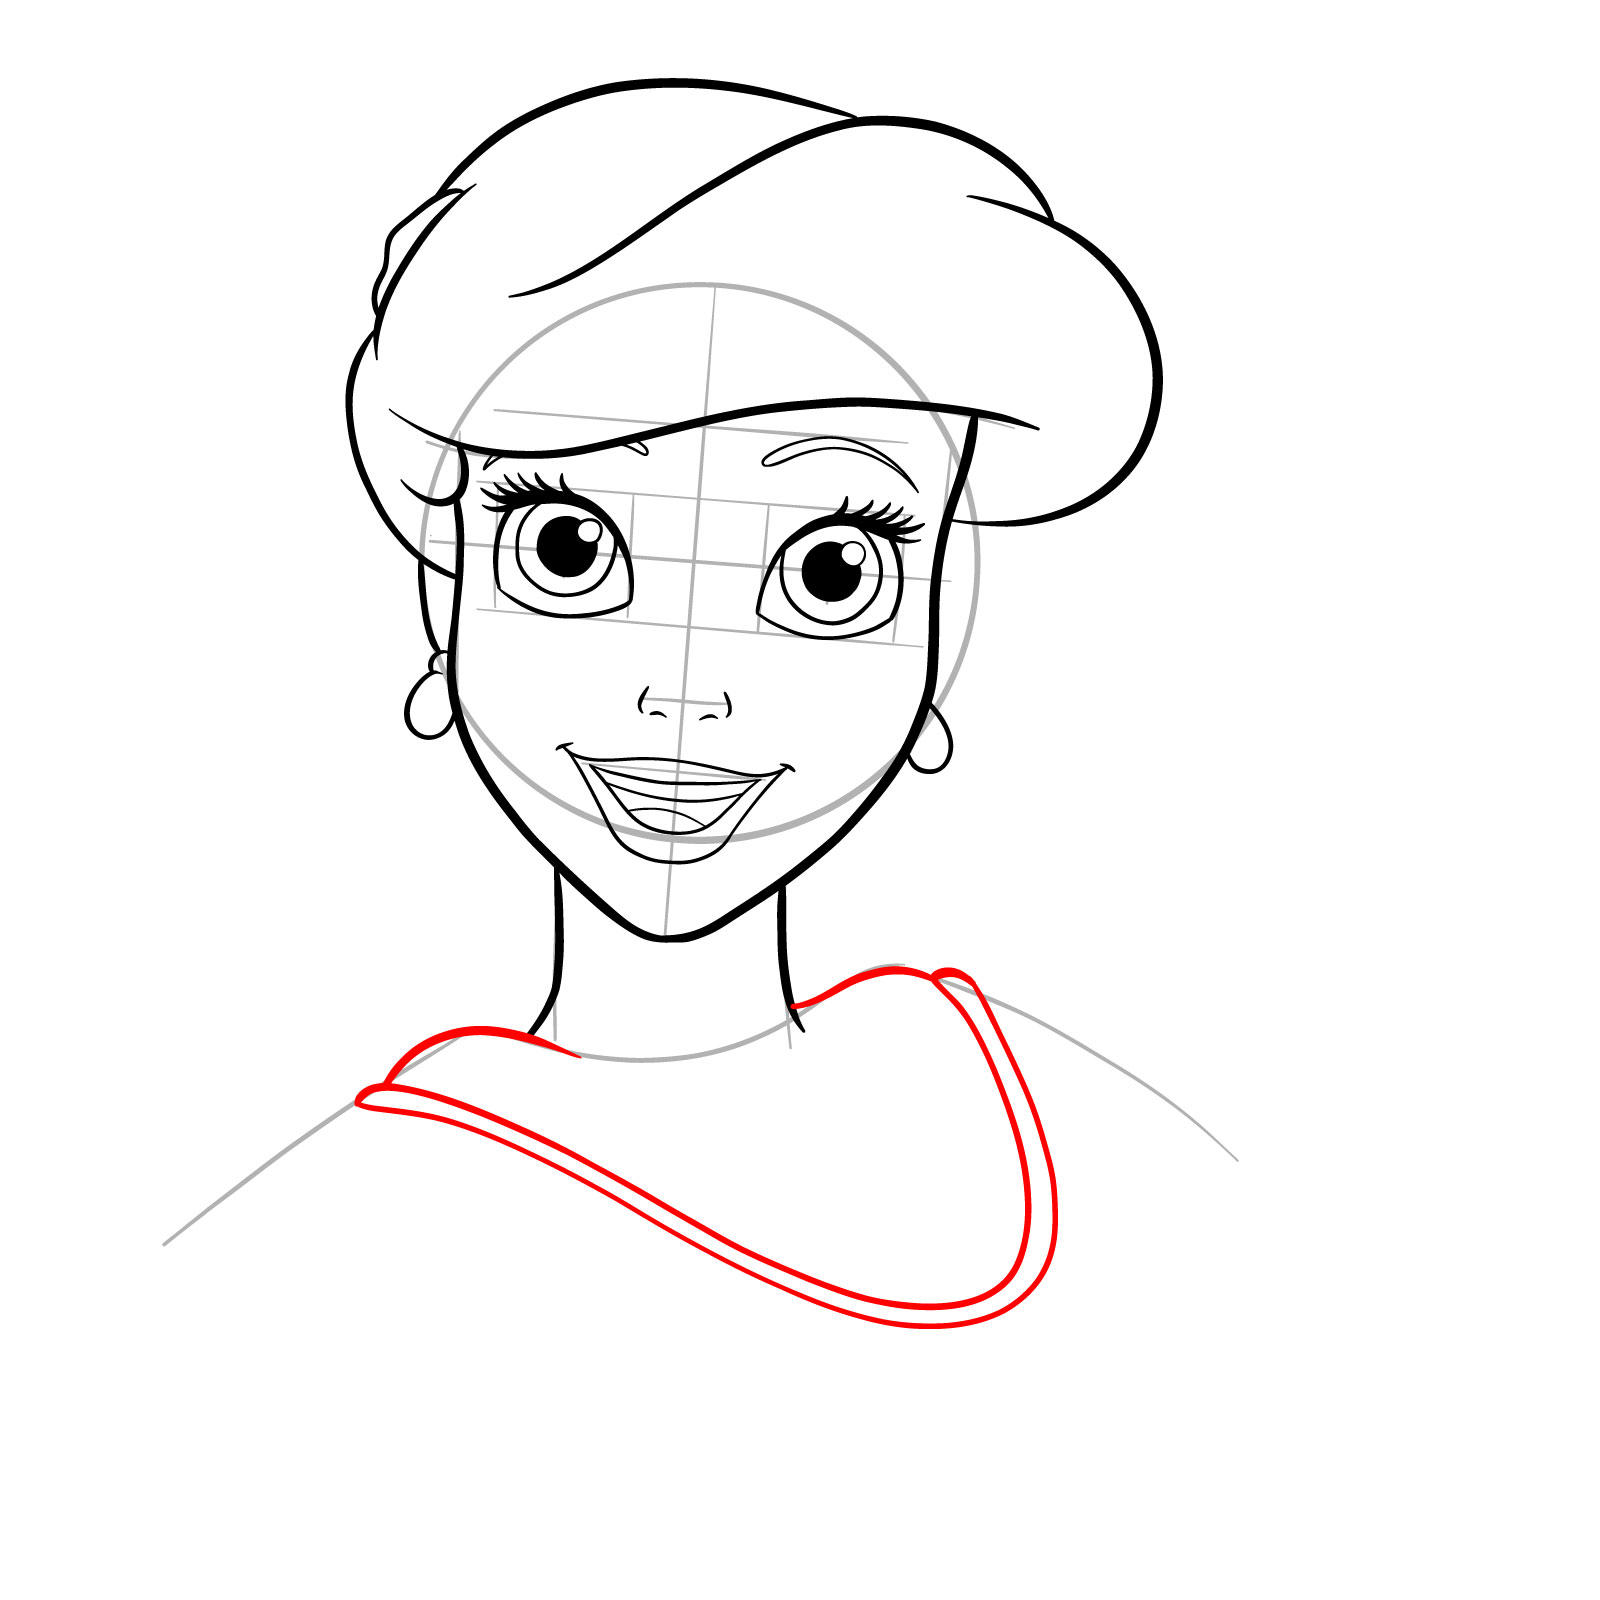 How to draw Ariel's face - The Little Mermaid - step 24